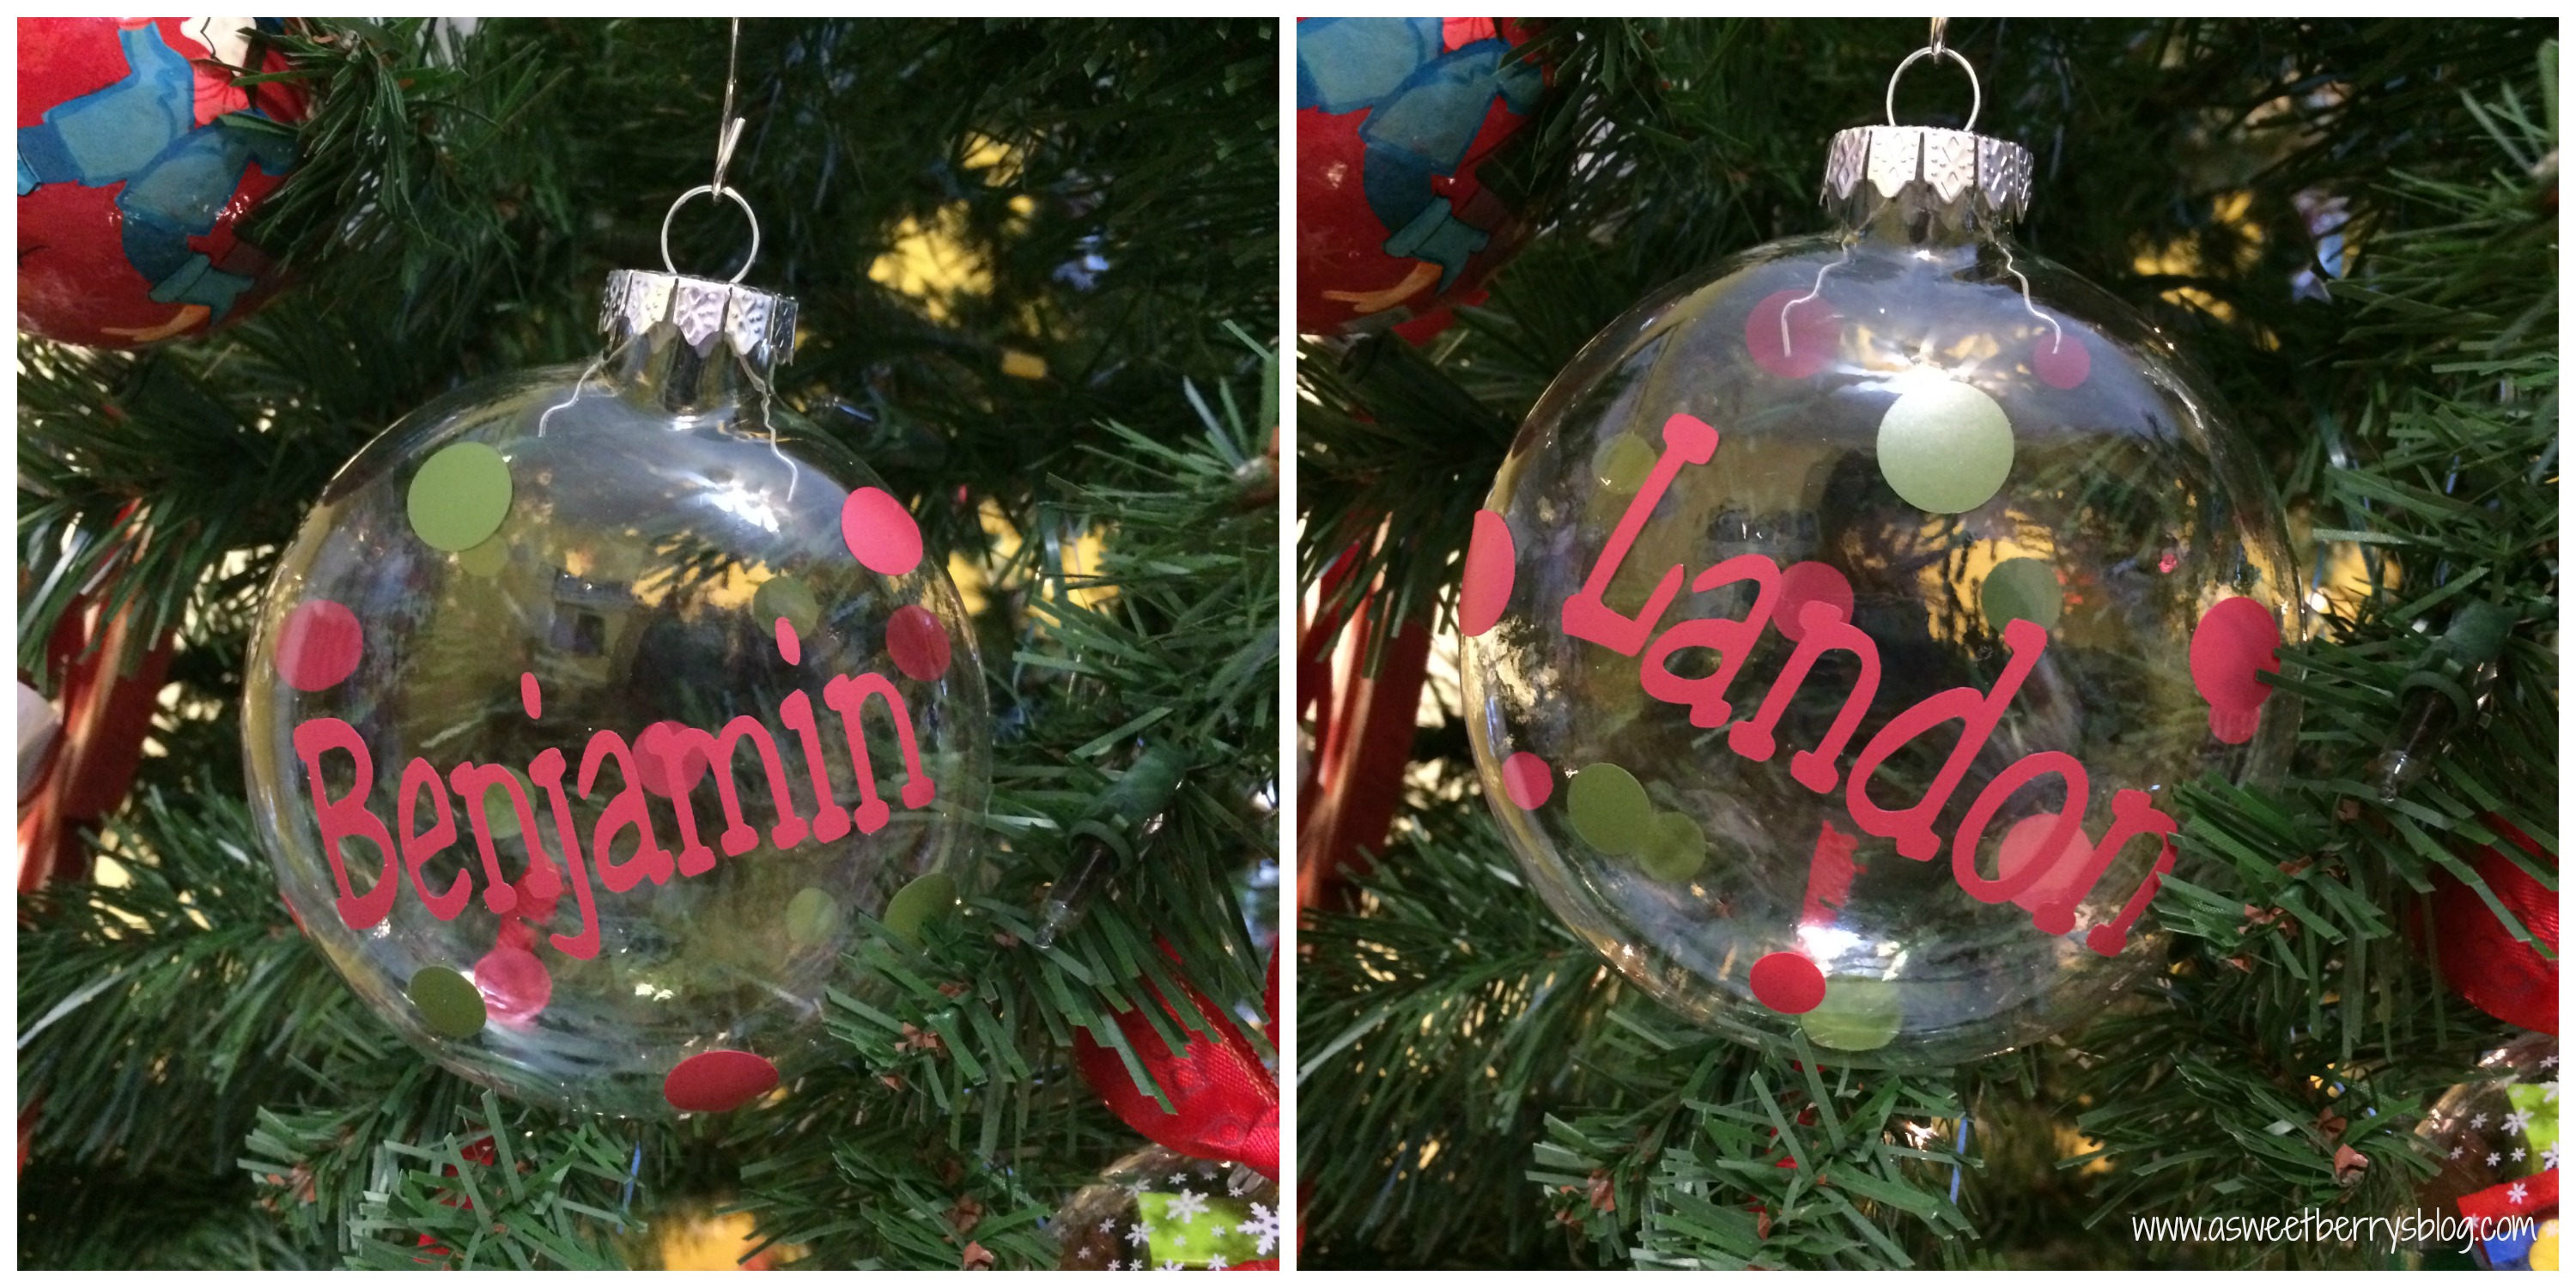 Quick and Easy DIY Christmas Ornaments - Laura Kelly's Inklings